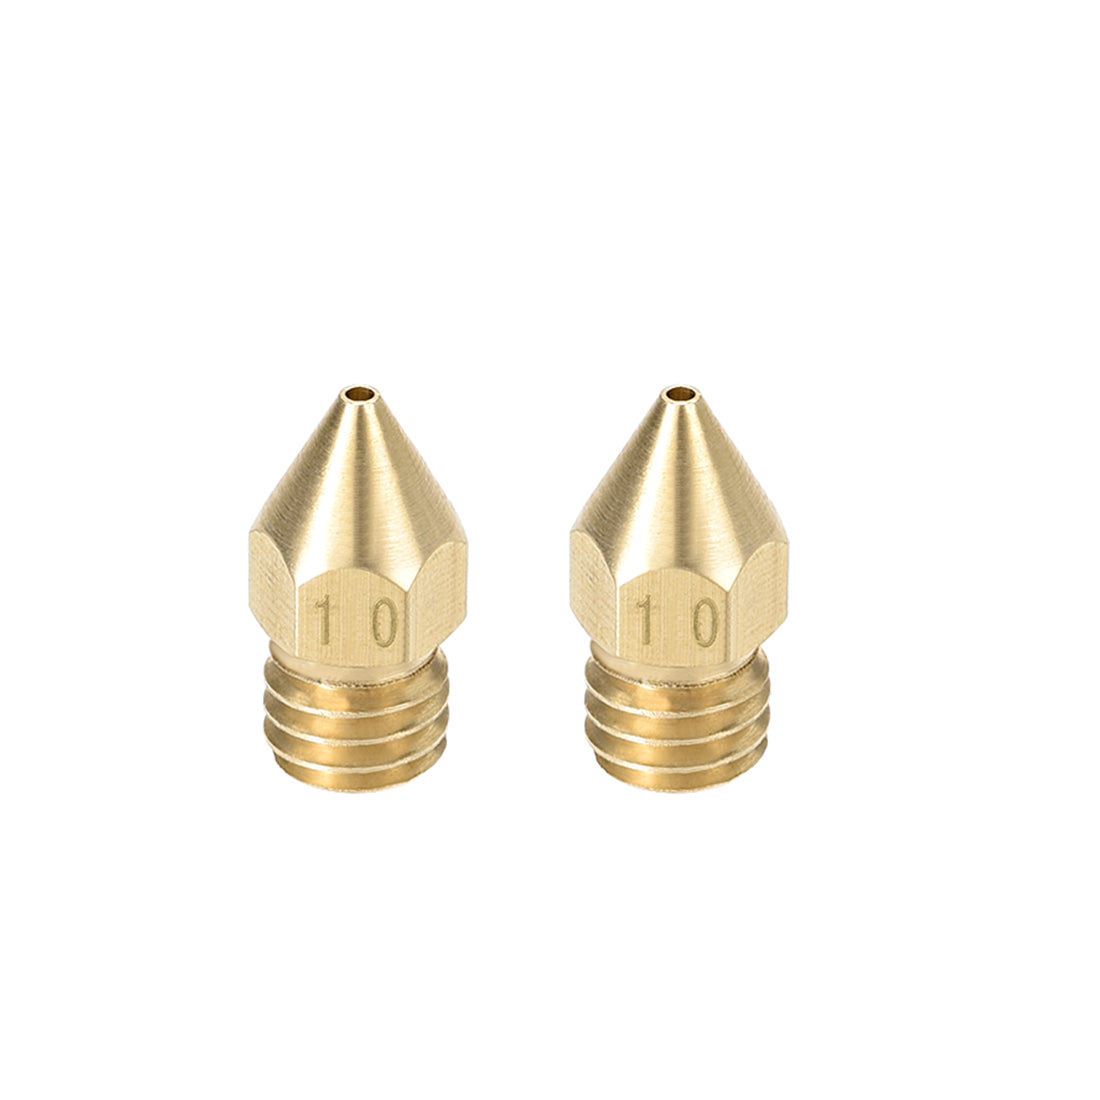 uxcell Uxcell 1mm 3D Printer Nozzle, Fit for MK8, for 1.75mm Filament Brass 2pcs